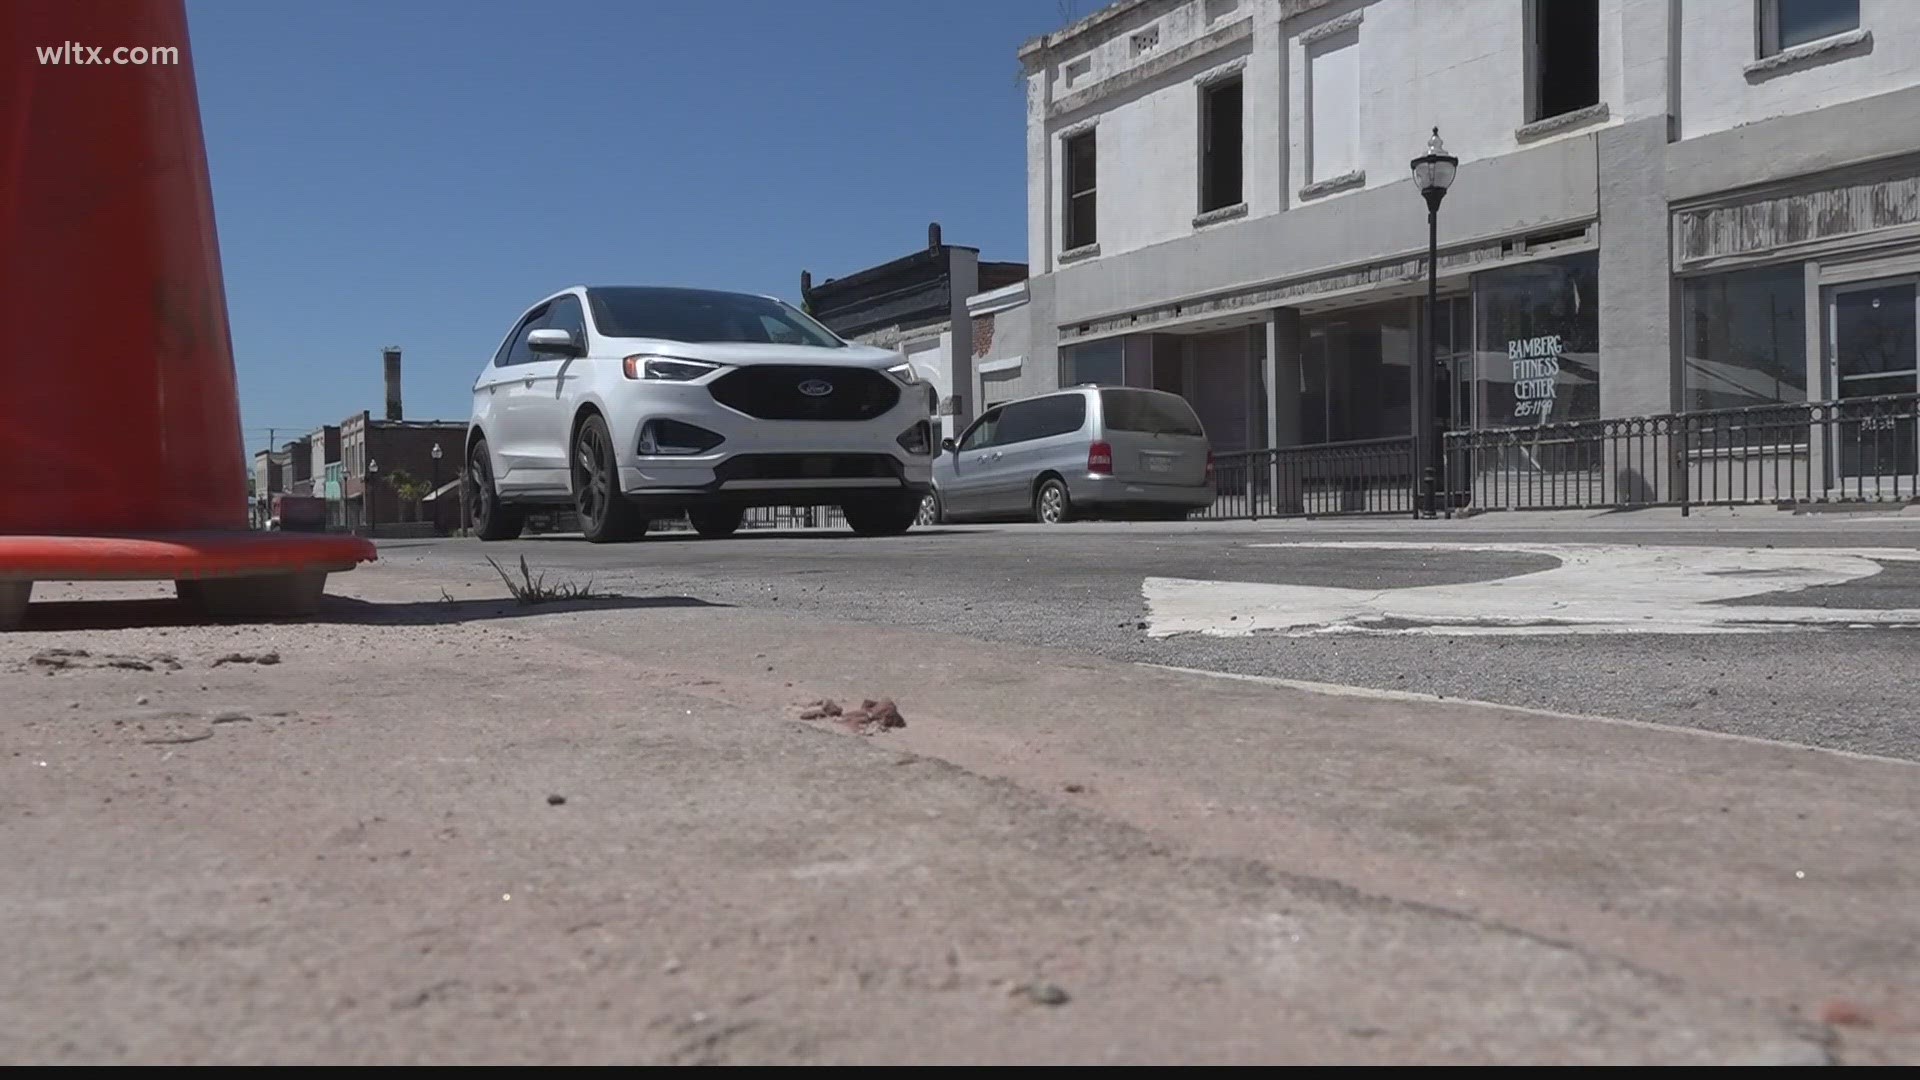 In January an EF-2 tornado touched down causing serious damage, causing store fronts to fall all over the road.